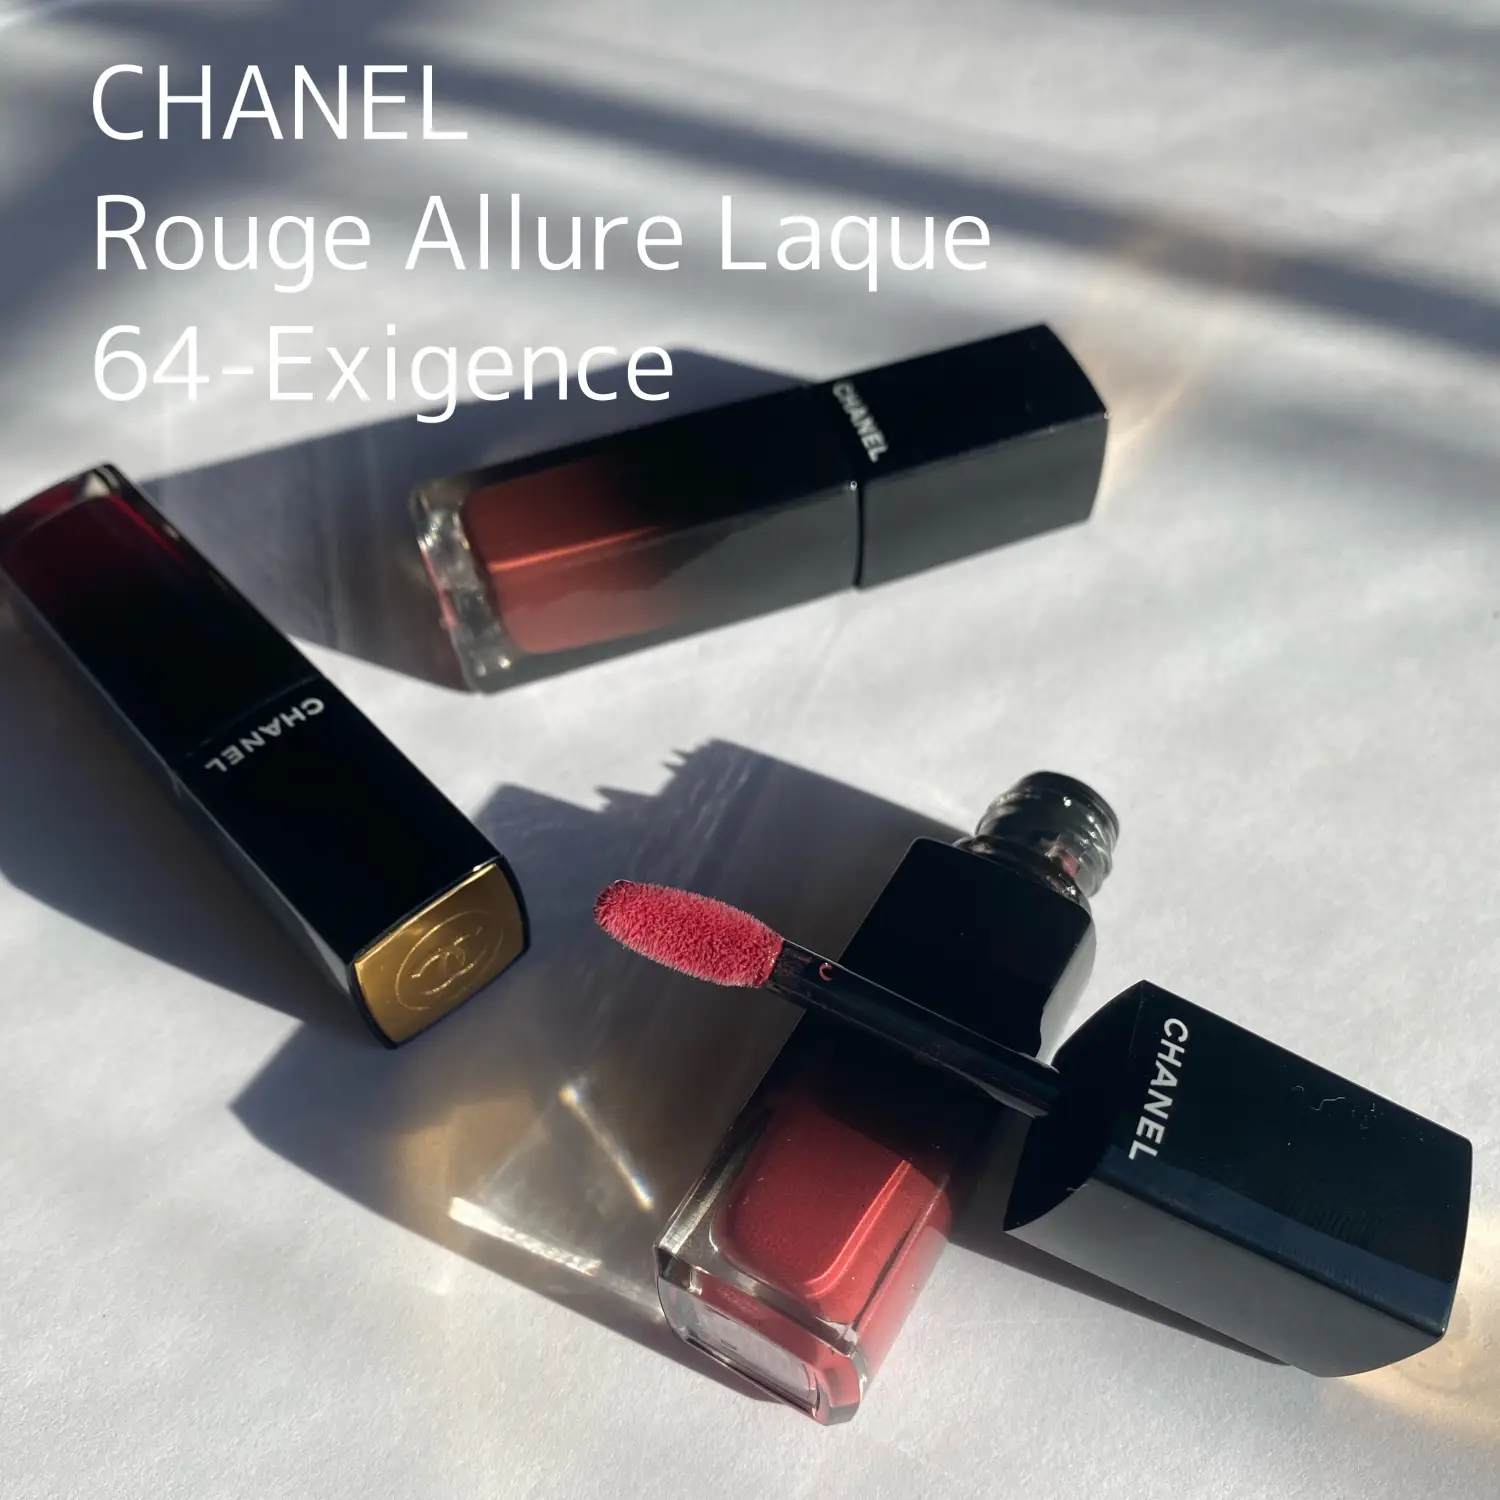 CHANEL RACK 64 - EXJUSTMENT, Gallery posted by Chloe